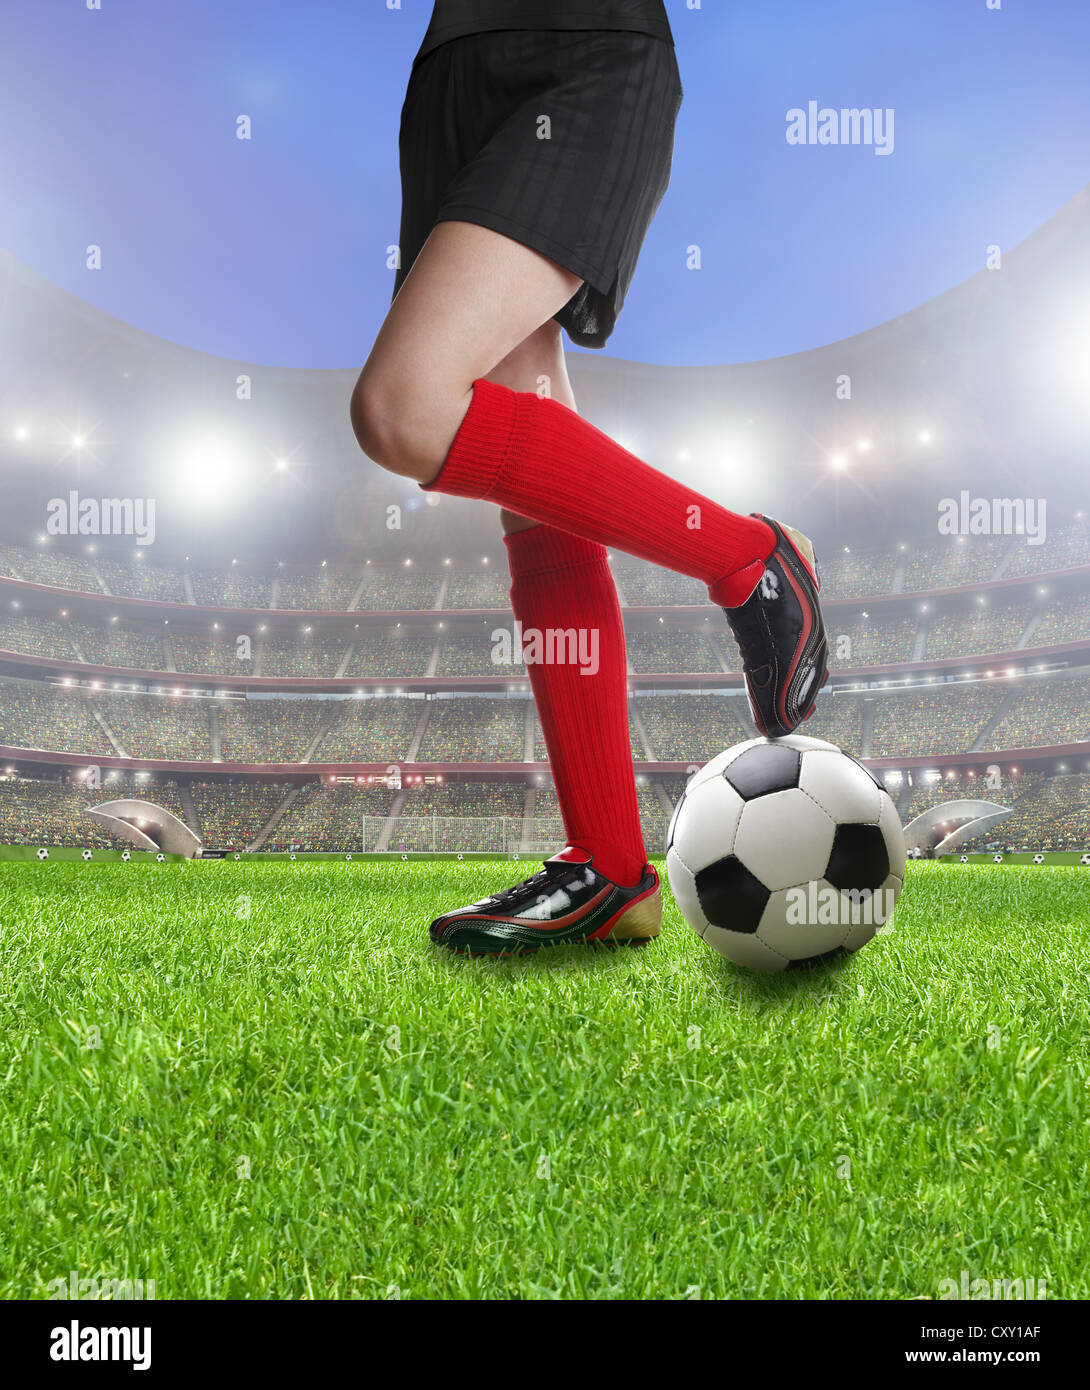 Legs of a female soccer player on a soccer ball at a football stadium, illustration Stock Photo